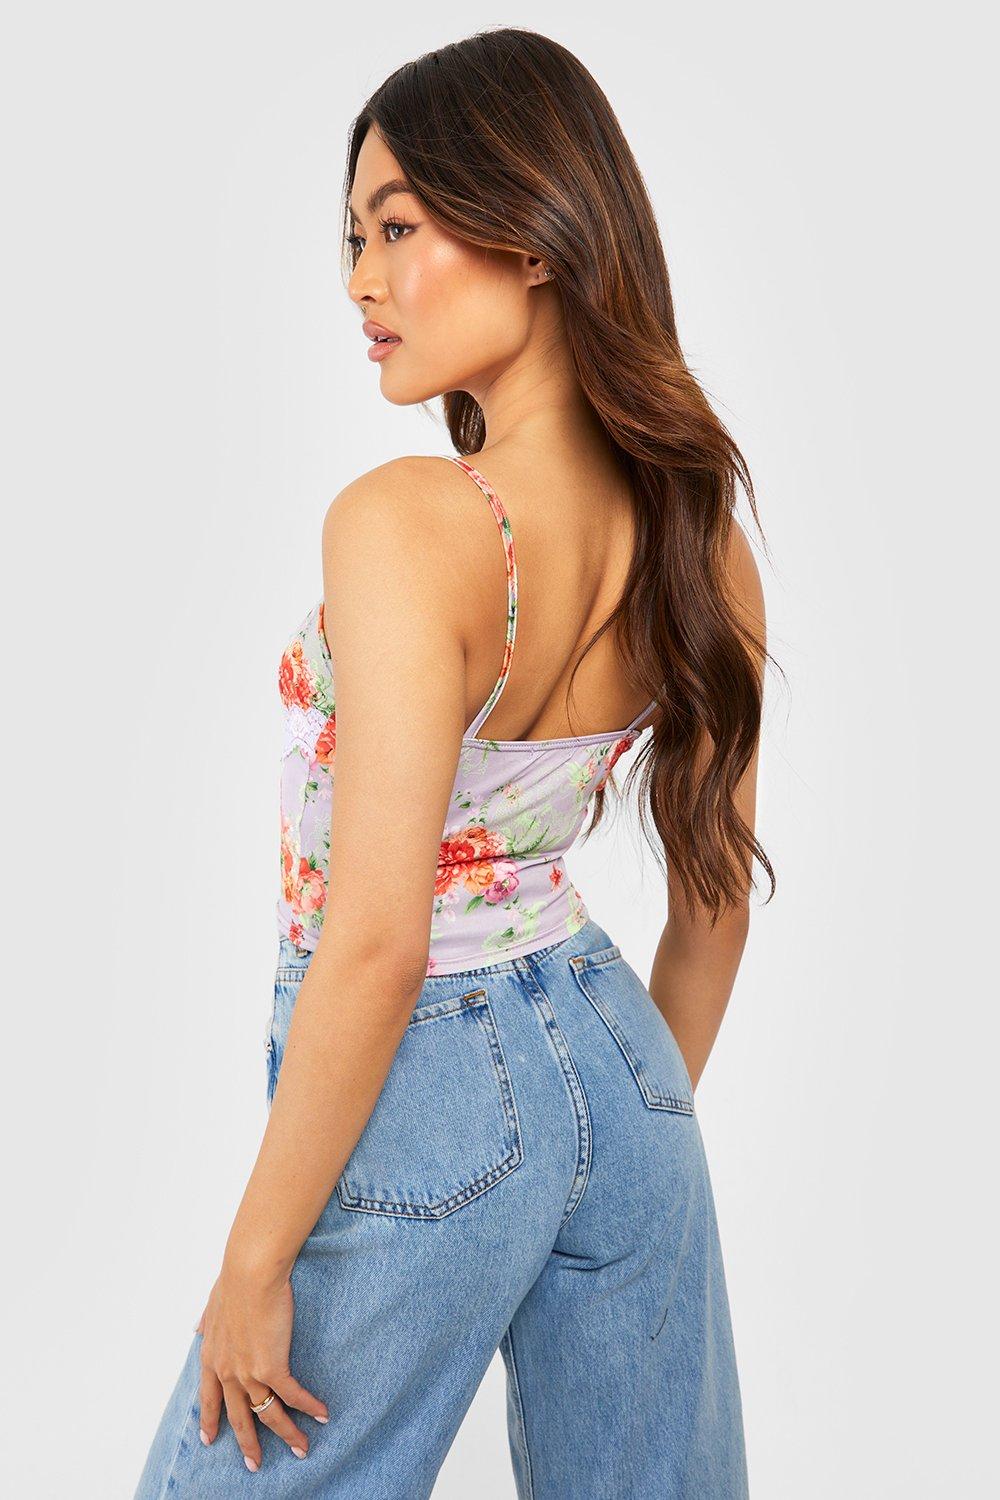 Is That The New Kawaii Contrast Lace Split Hem Cami Top ??